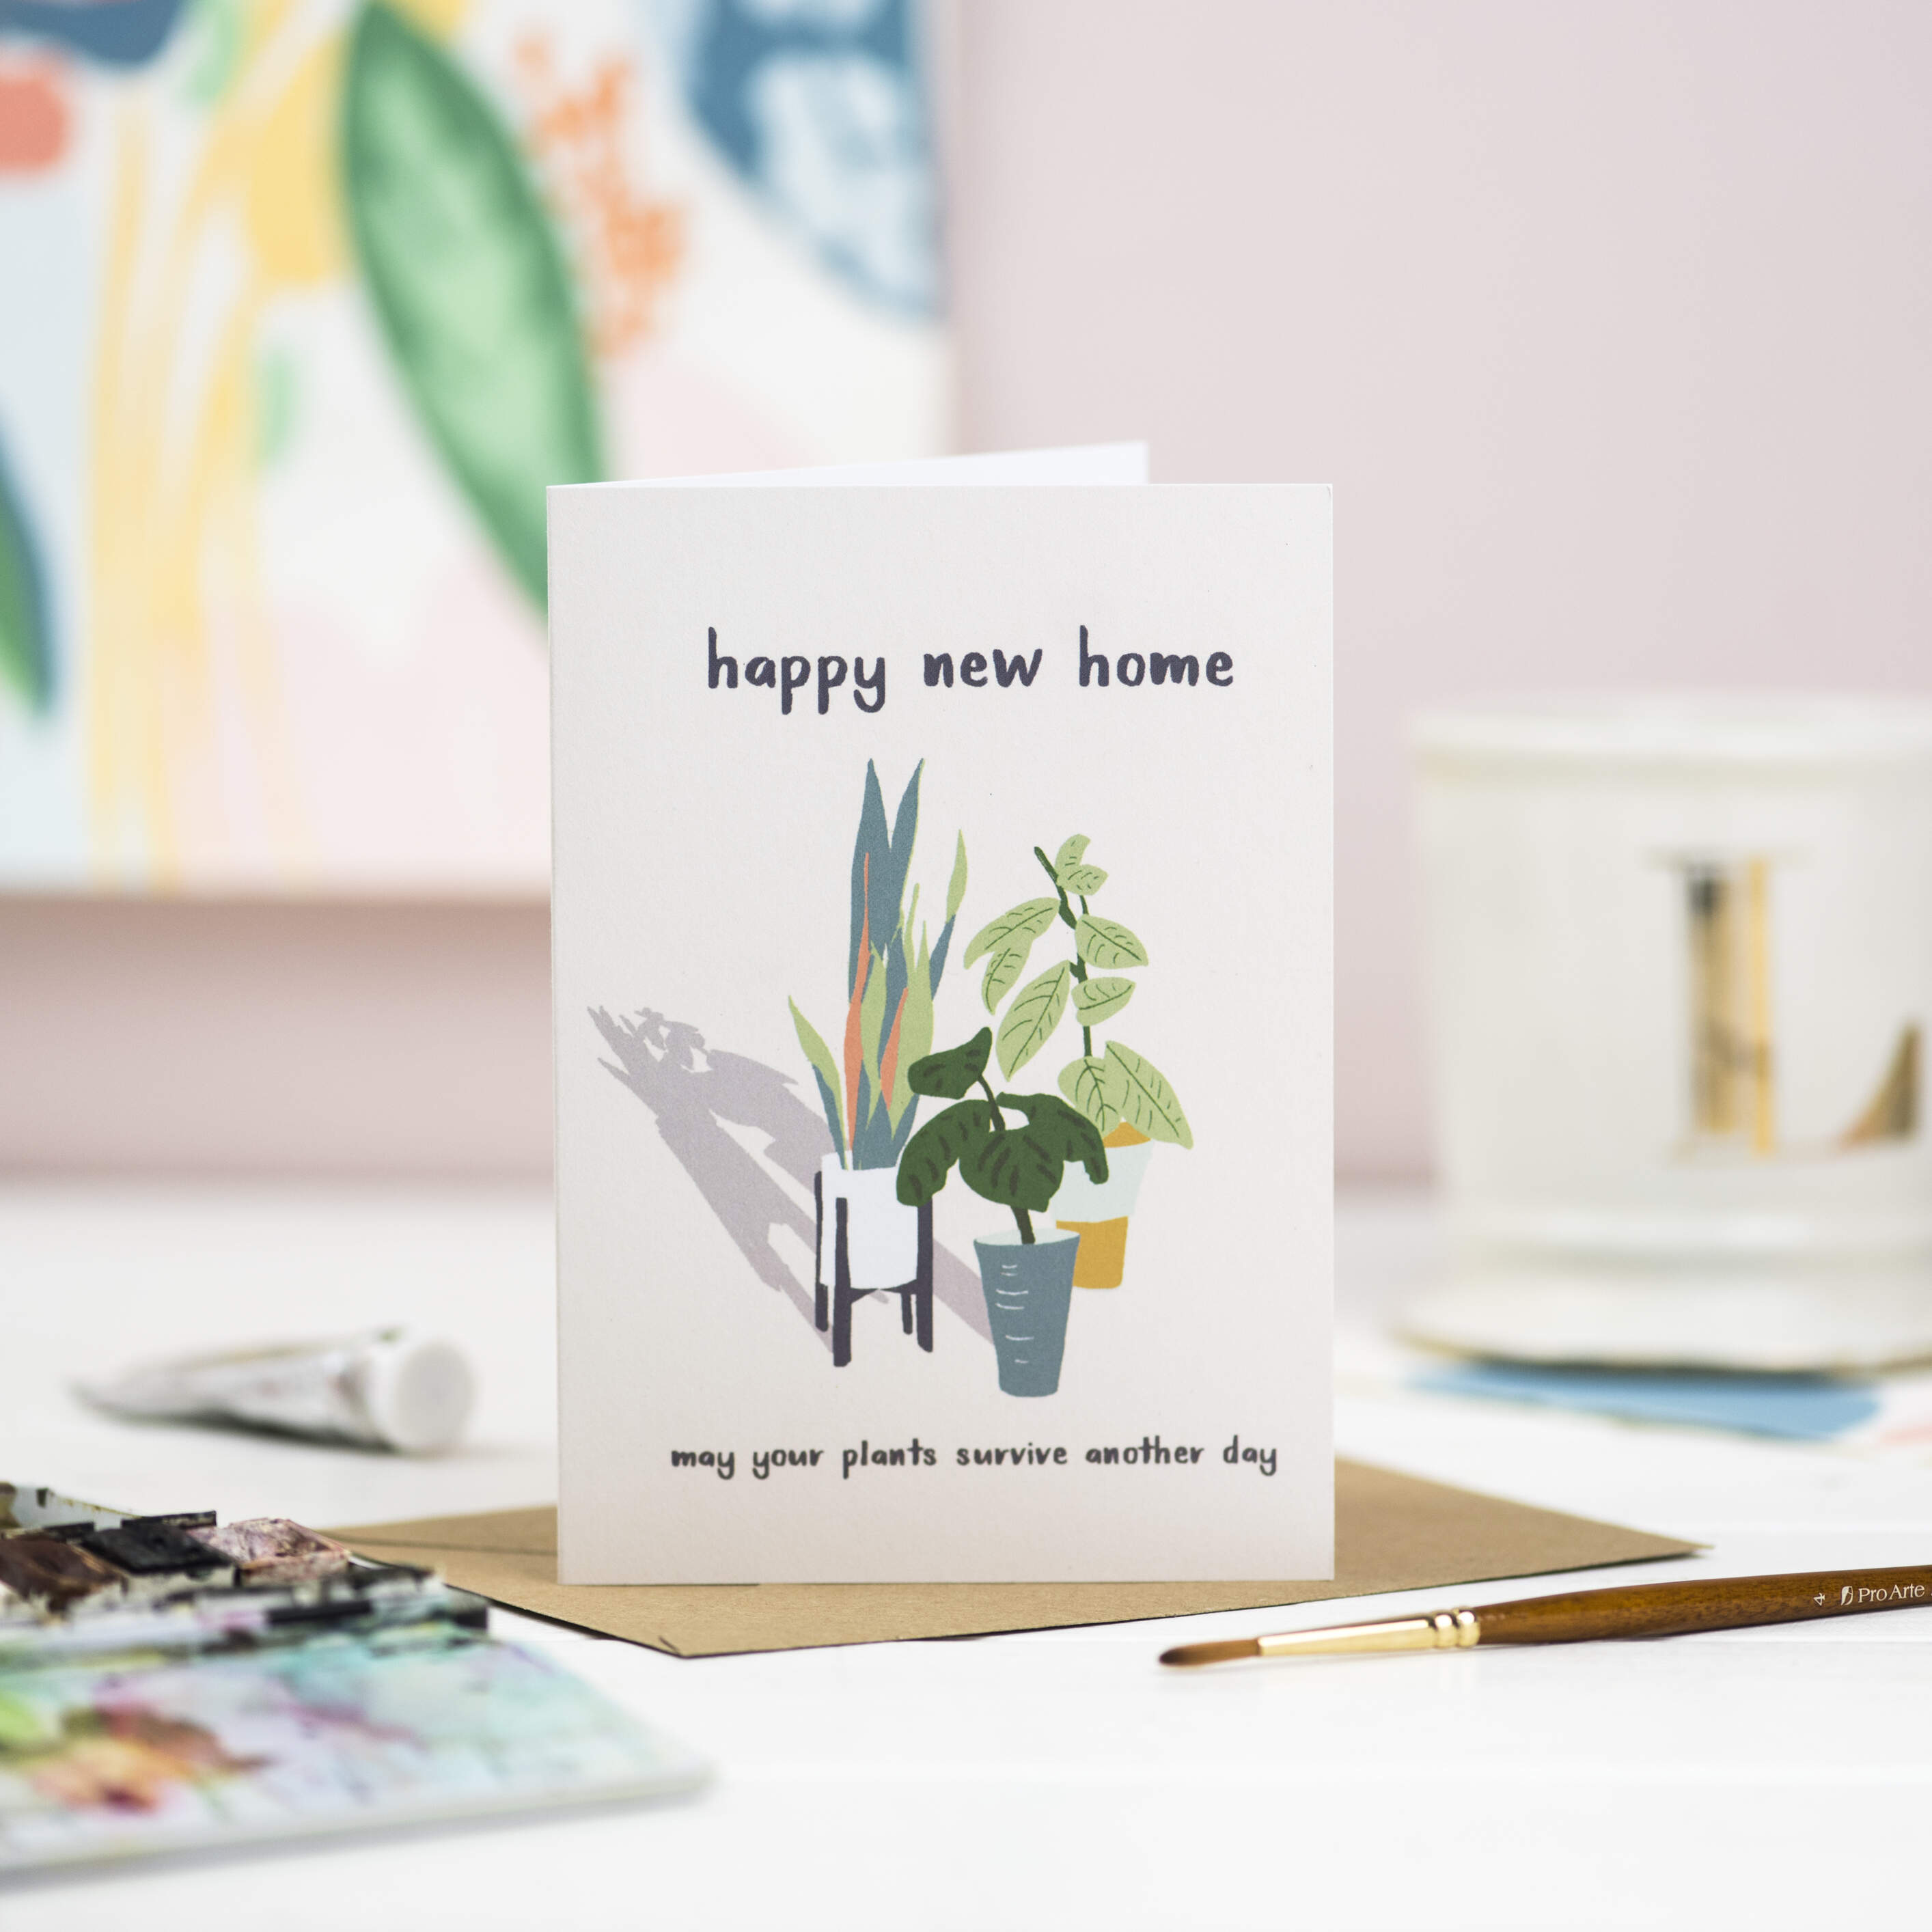 Happy new home greetings card